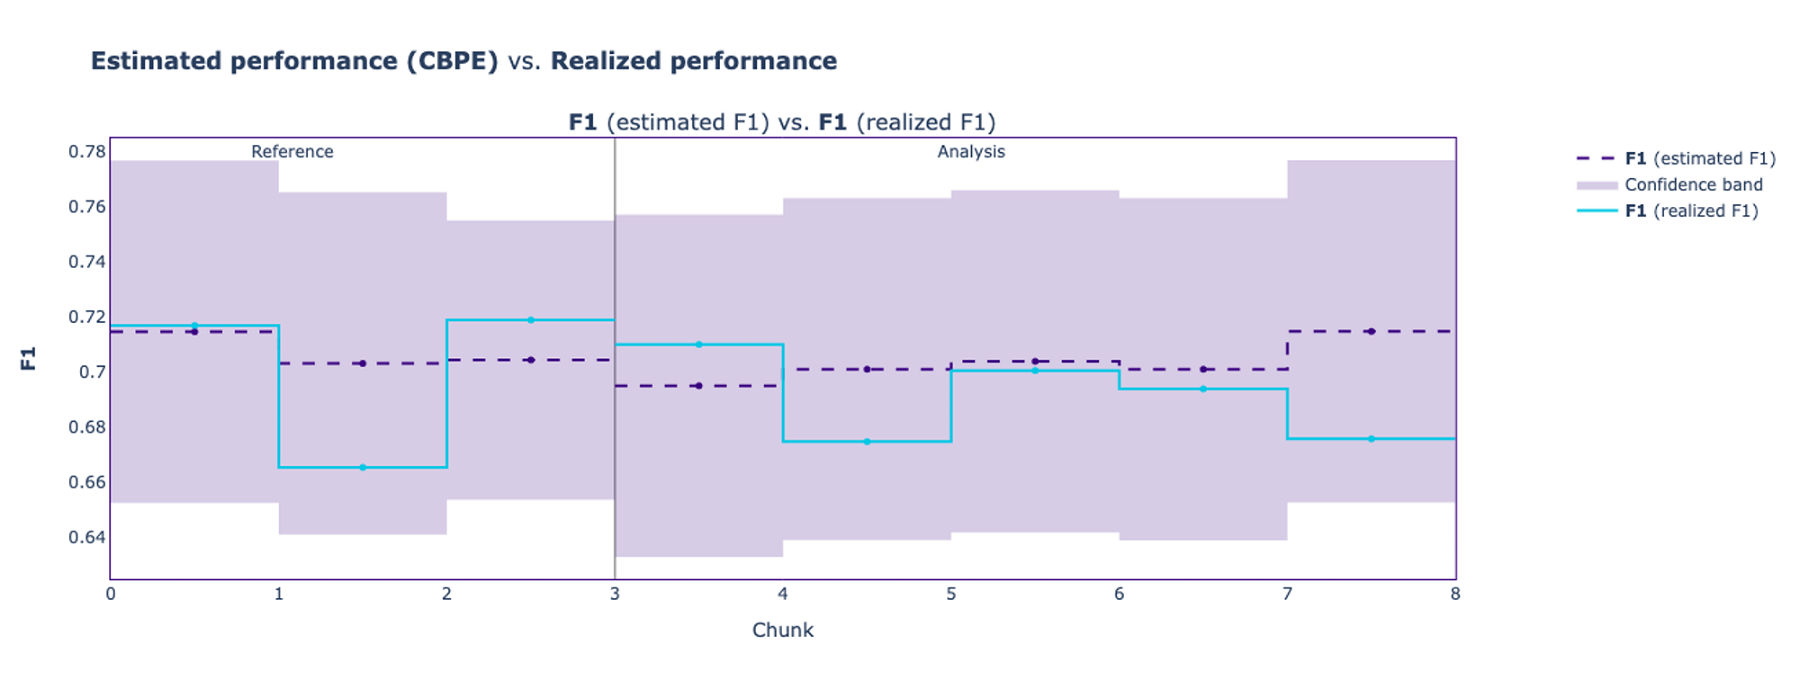 The vertical gray line divides the plot between reference (test) and analysis (production) periods. The purple dotted line represents the estimated performance by CBPE, and the light blue is the realized (actual) performance.